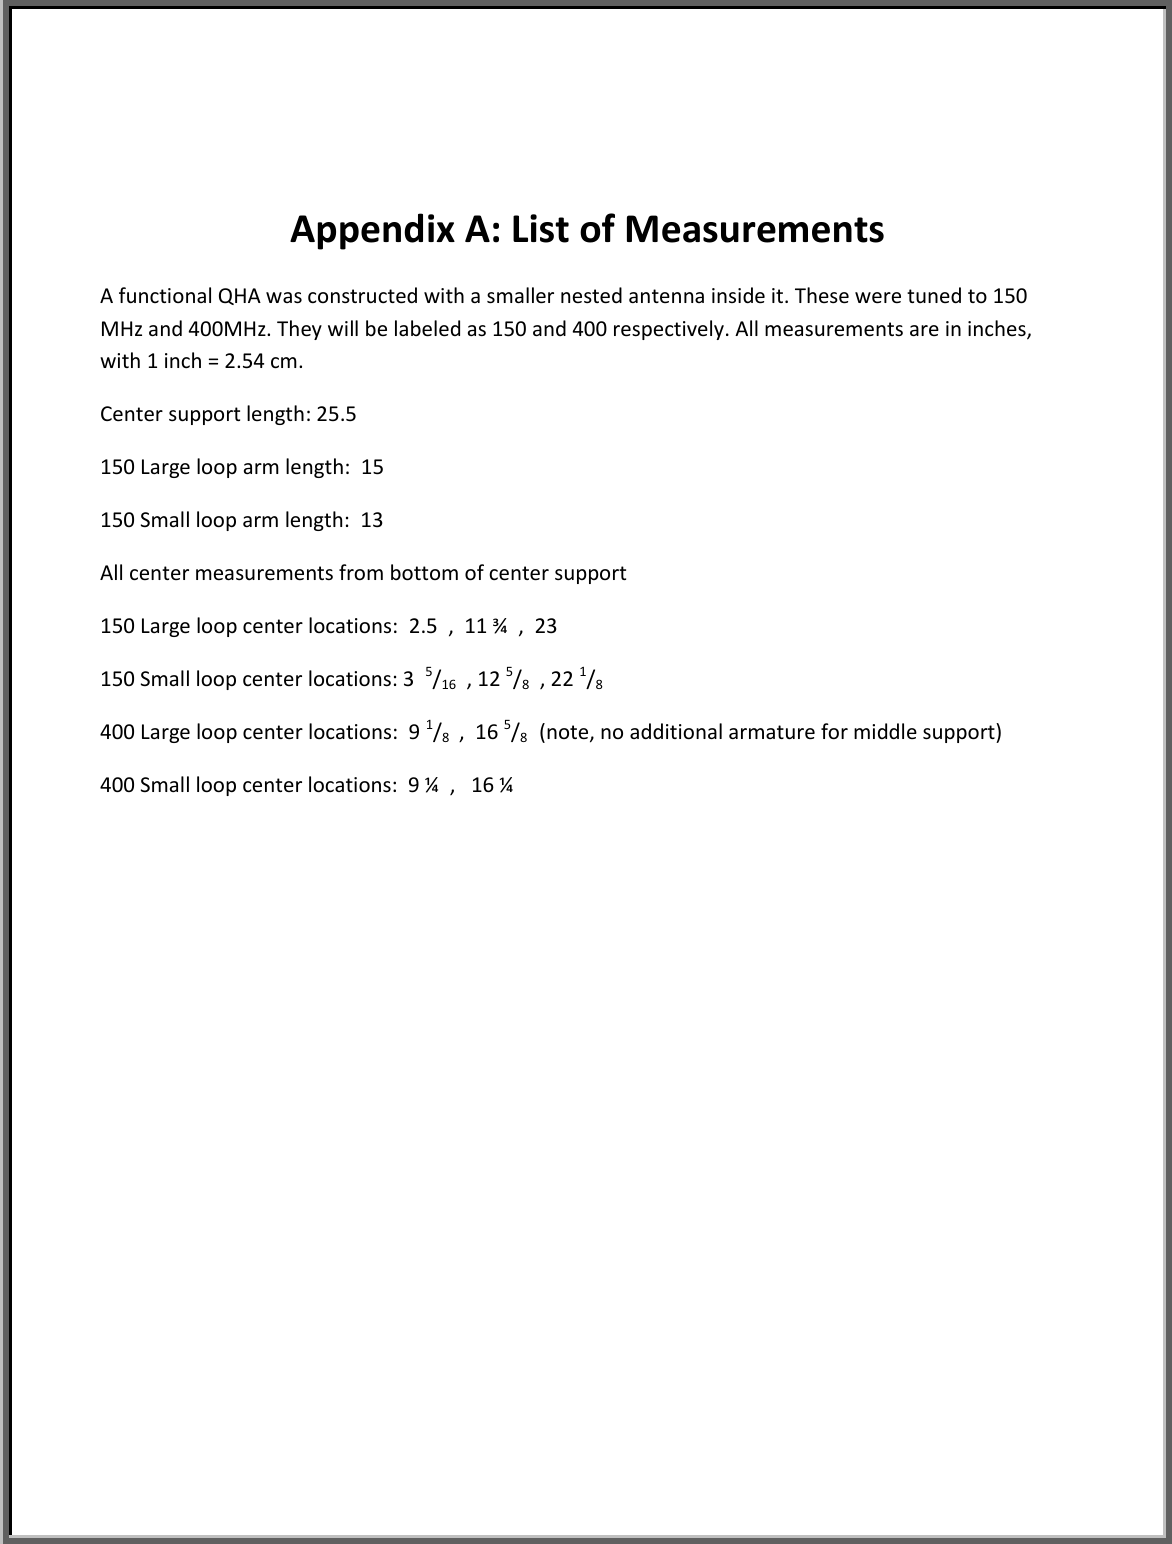 Page 11 of 11 - Building QFH Antenna Guide